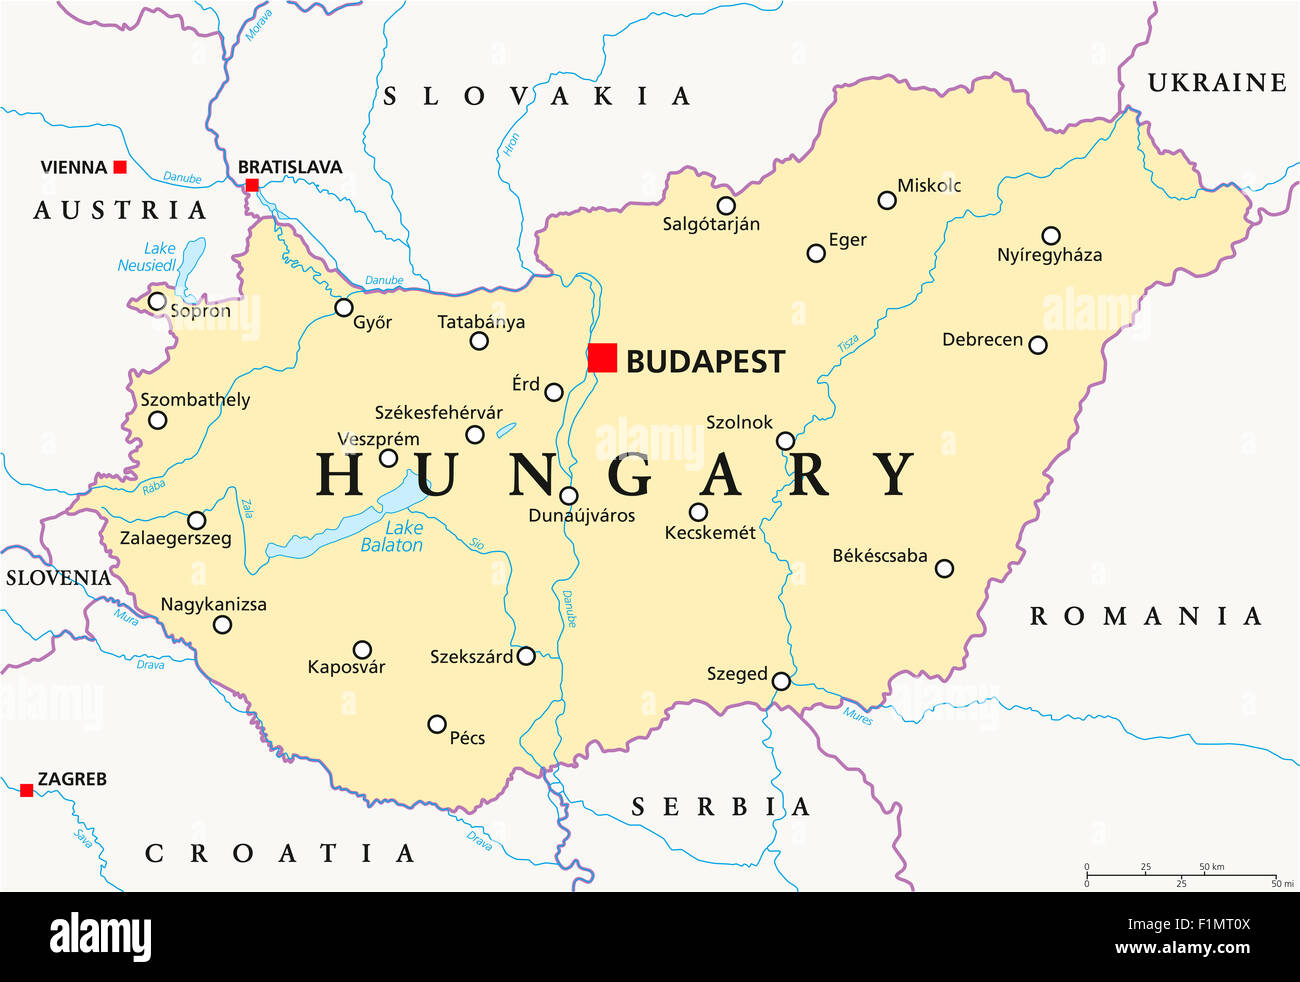 Hungary political map with capital Budapest, national borders, important cities, rivers and lakes. English labeling and scaling. Stock Photo